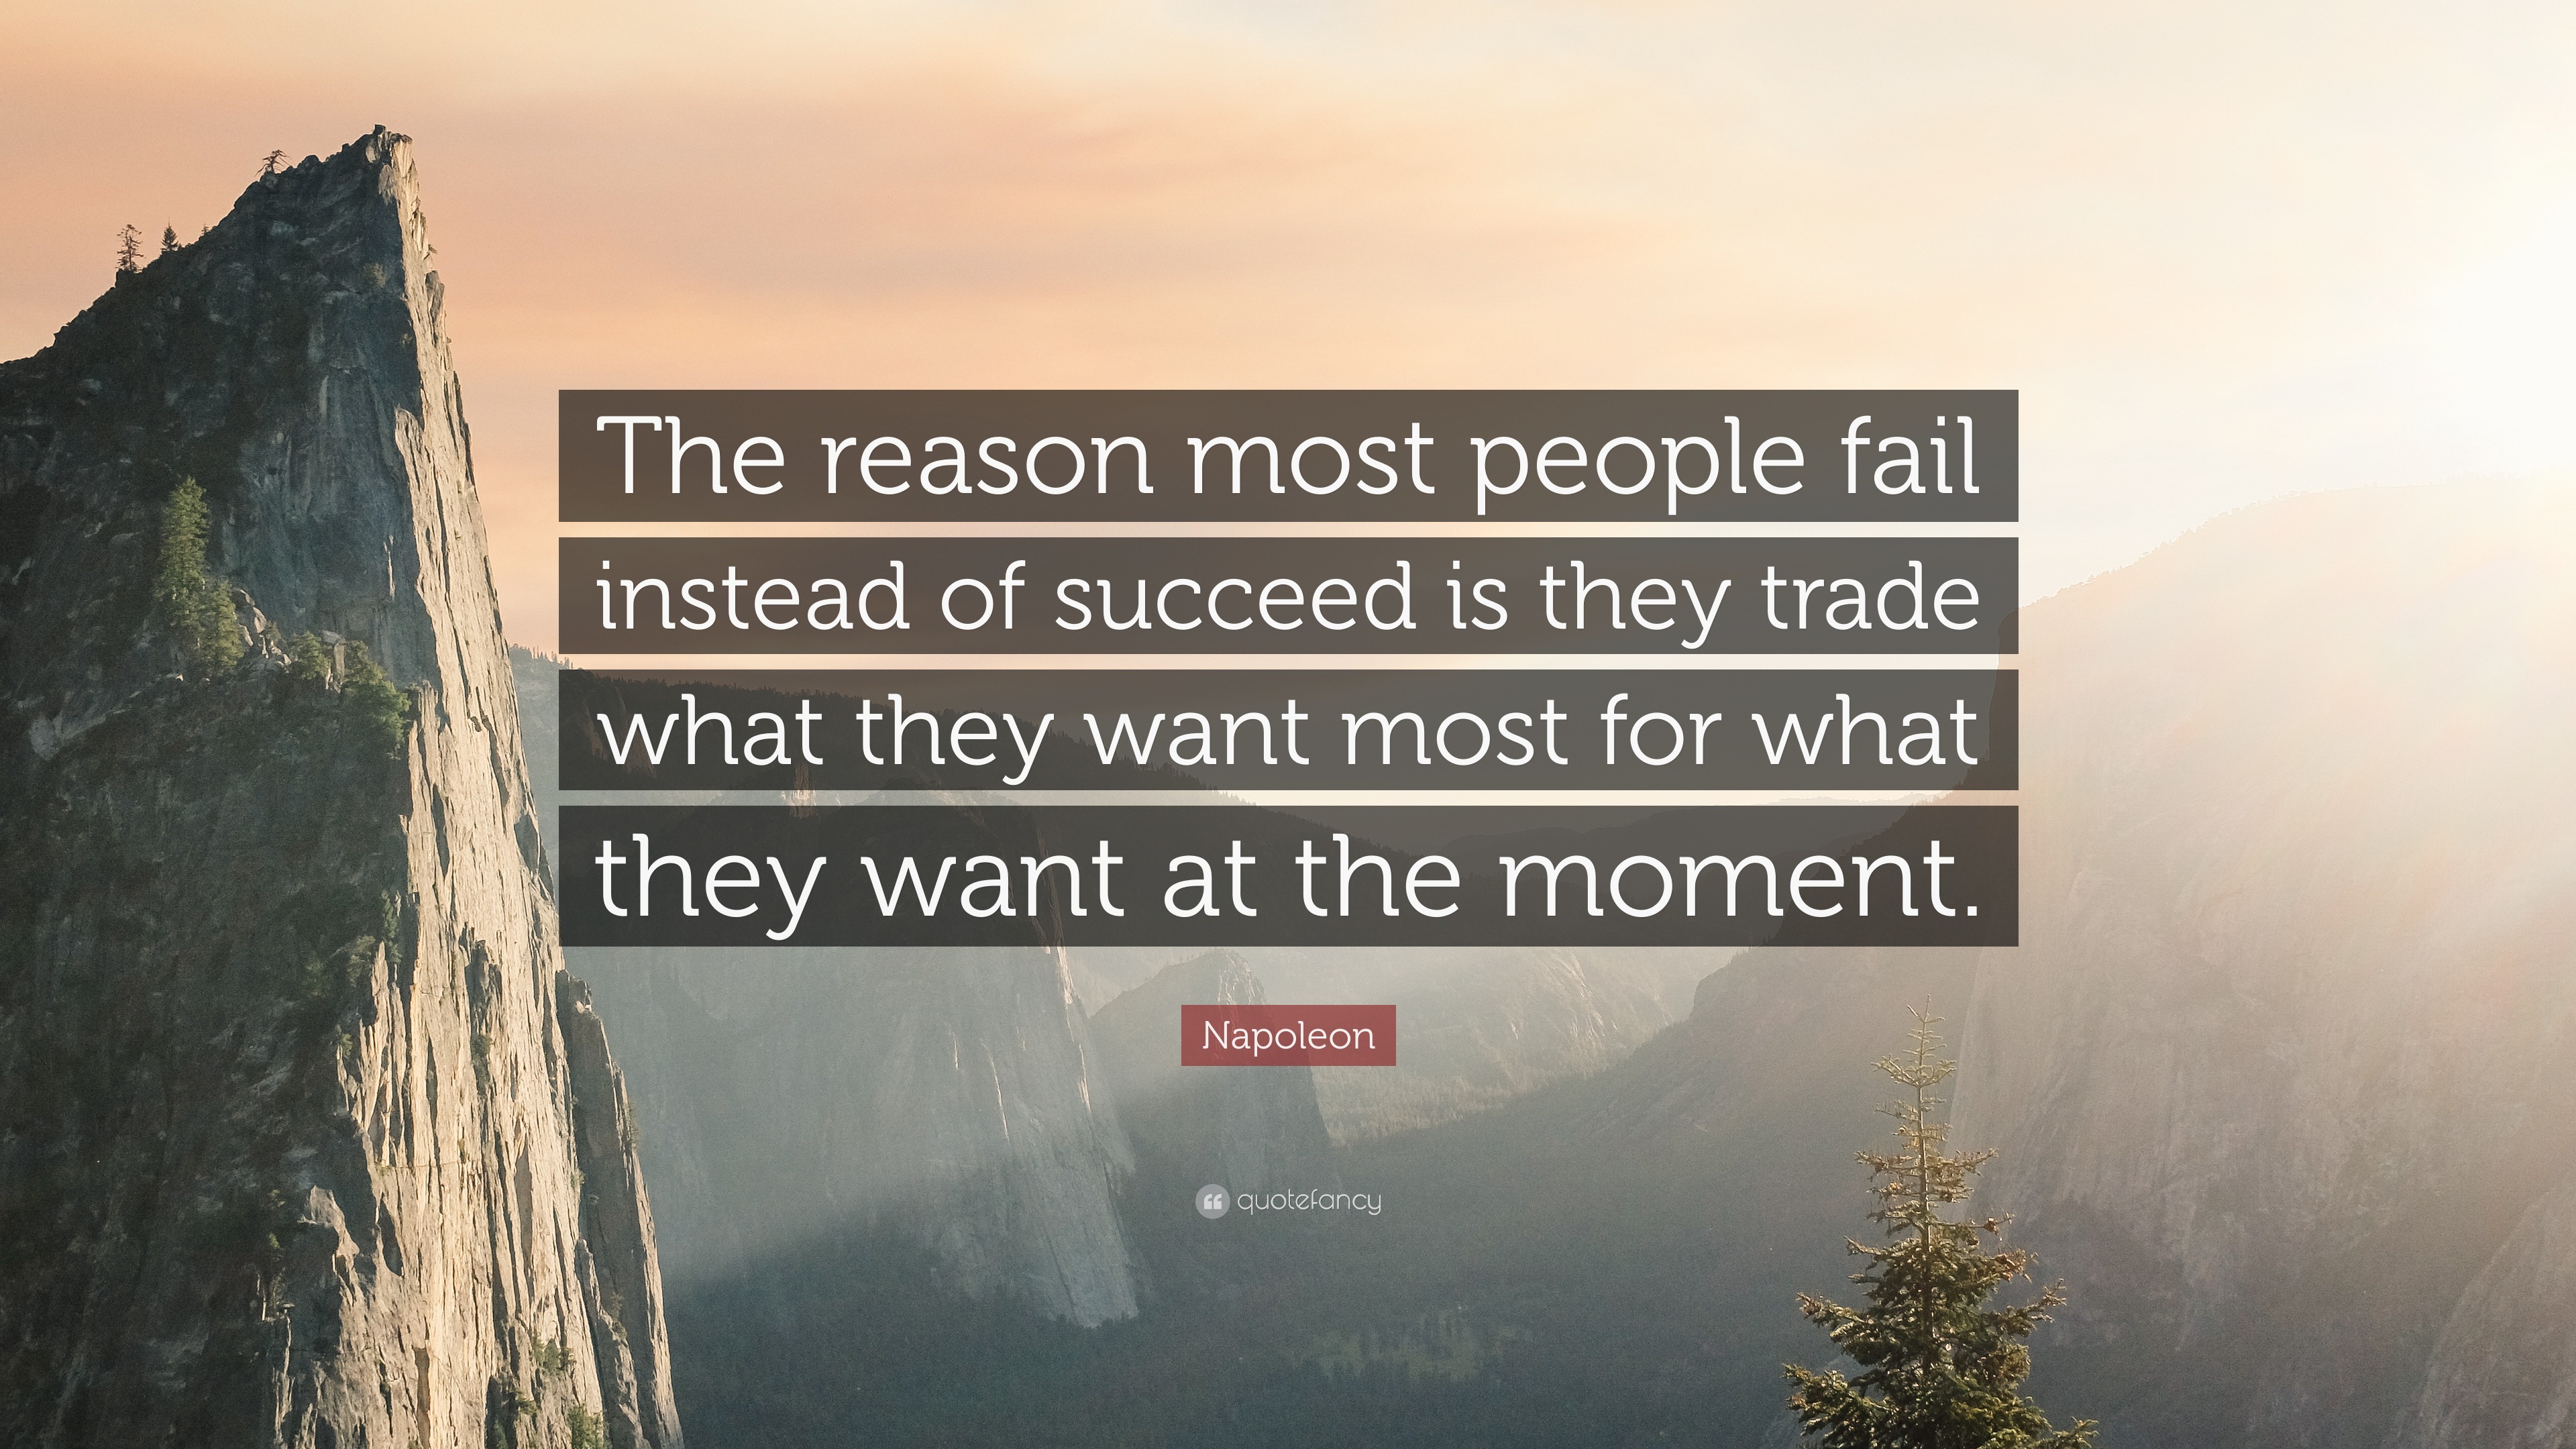 8. The reason most people fail is because they give up what they want most for what they want now. 